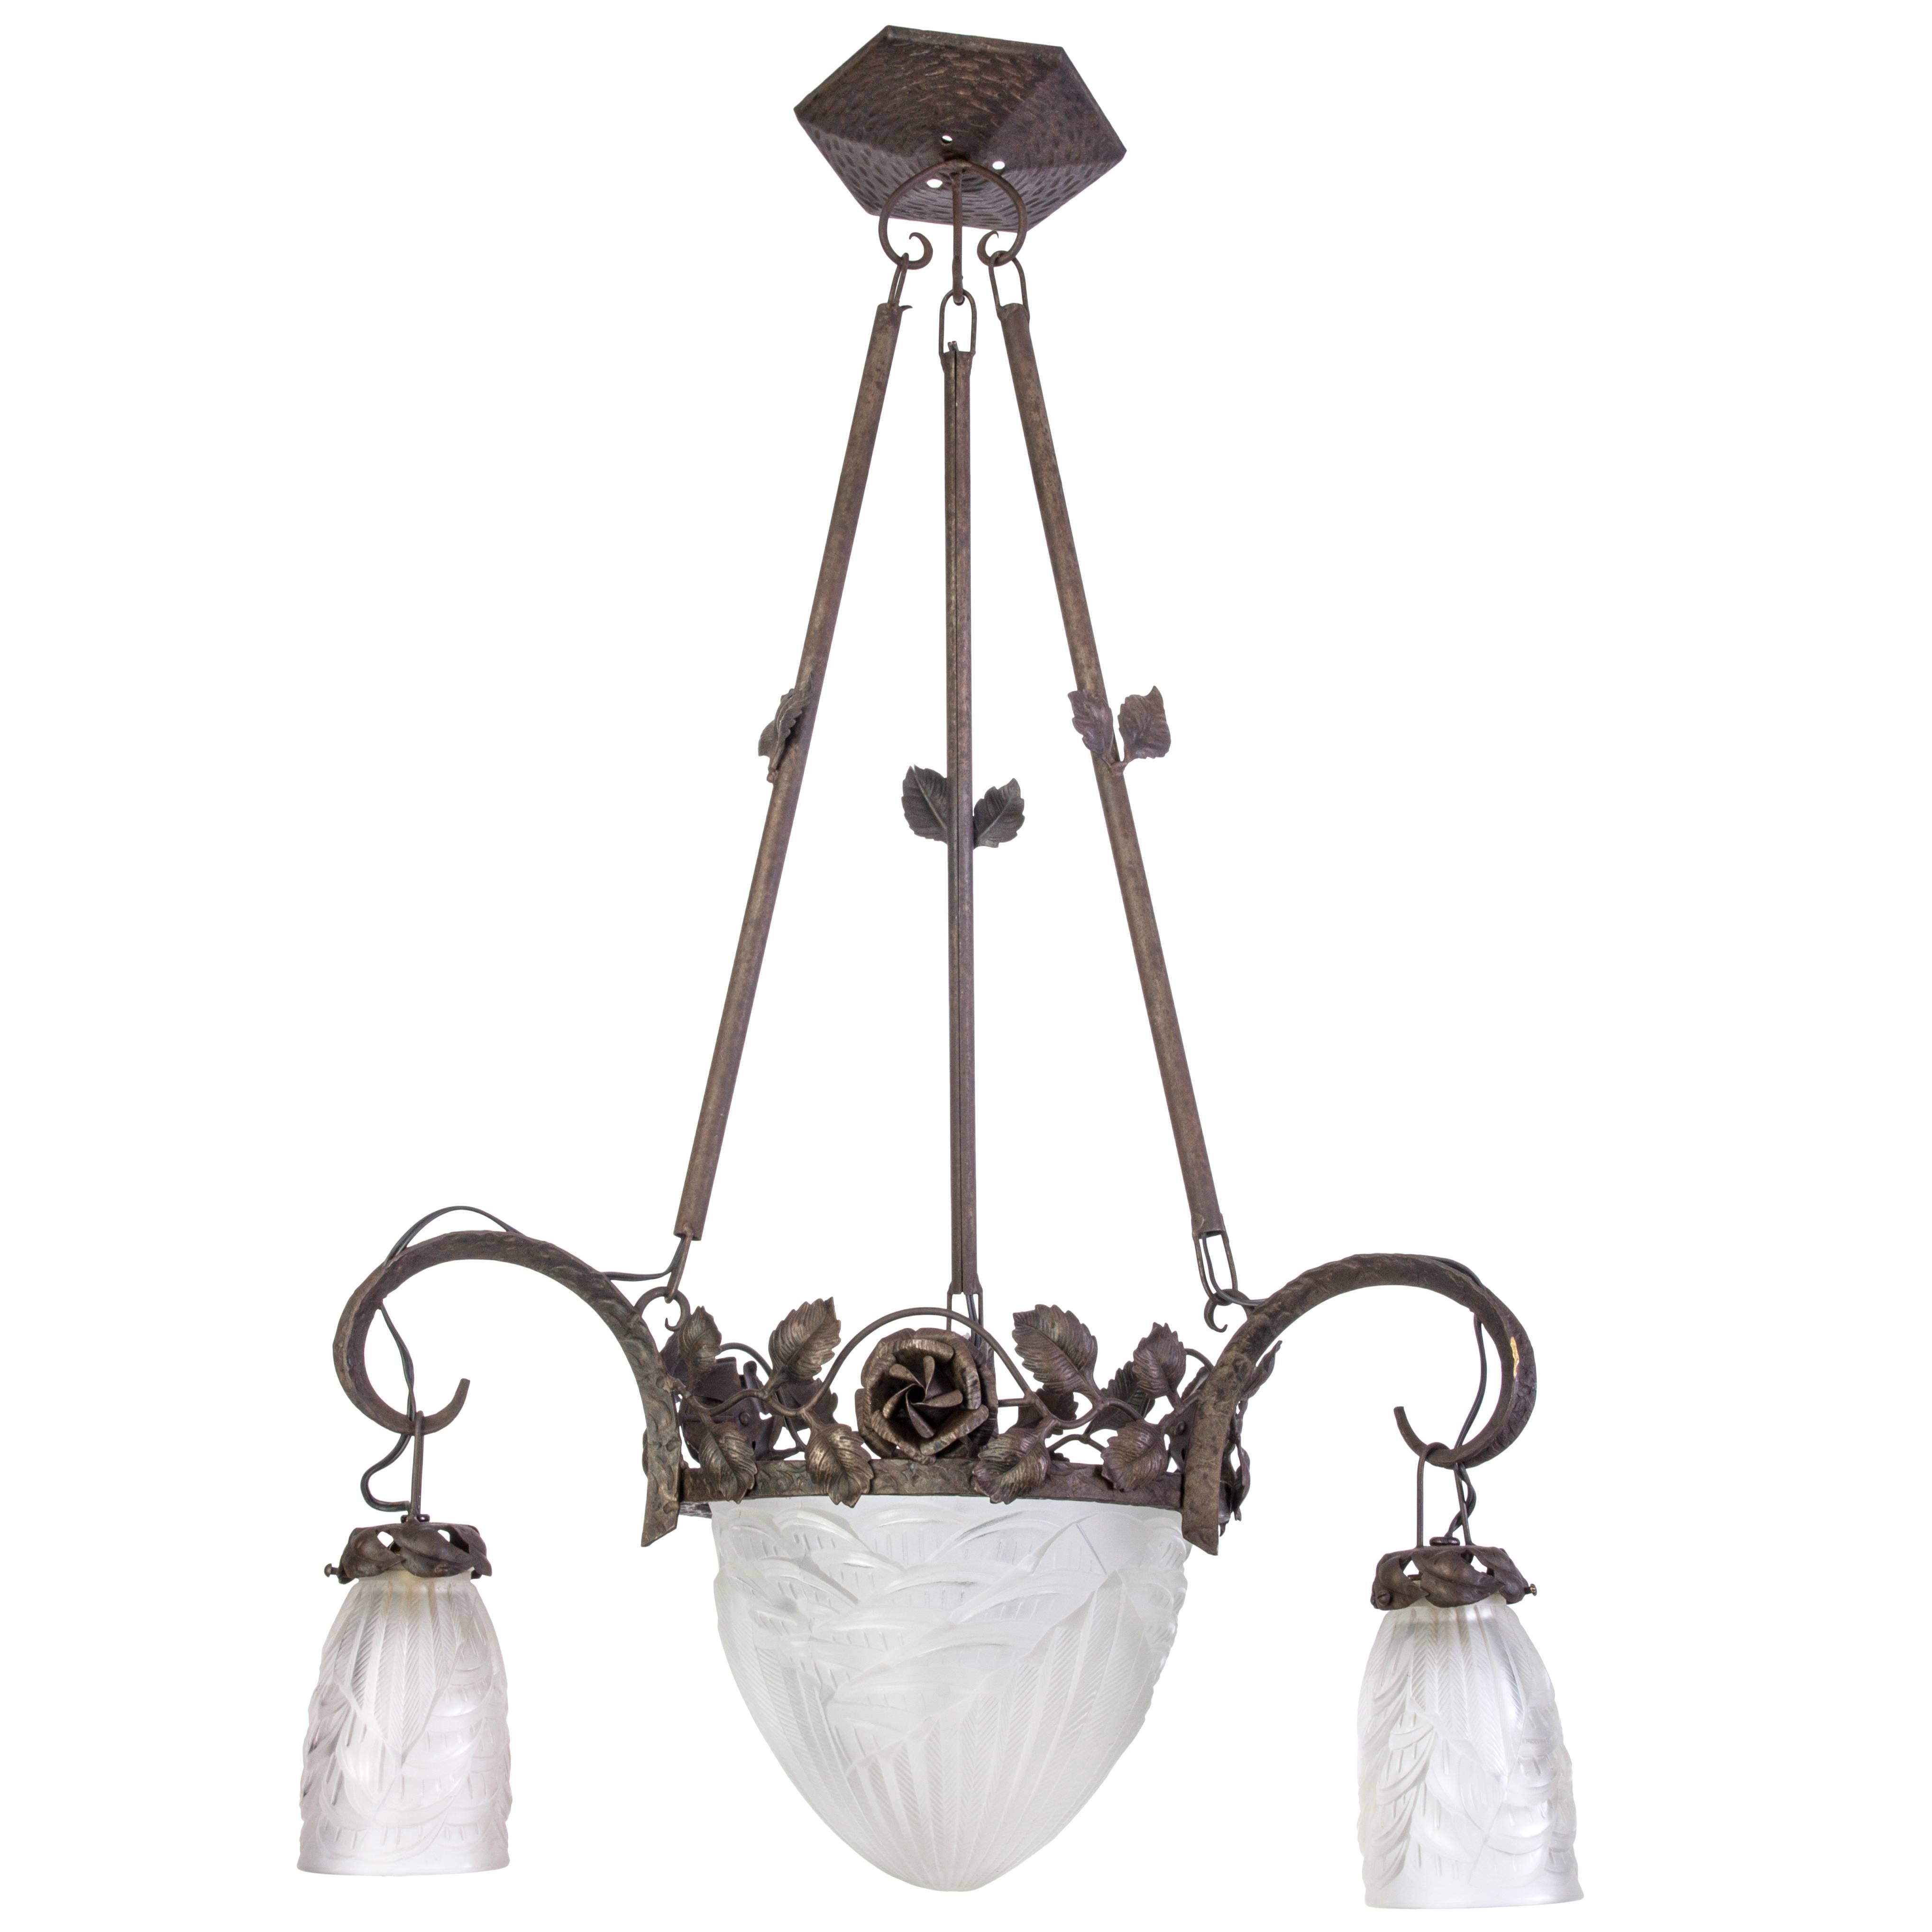 Magnificent Early French Art Deco Chandelier by Charles Schneider For Sale